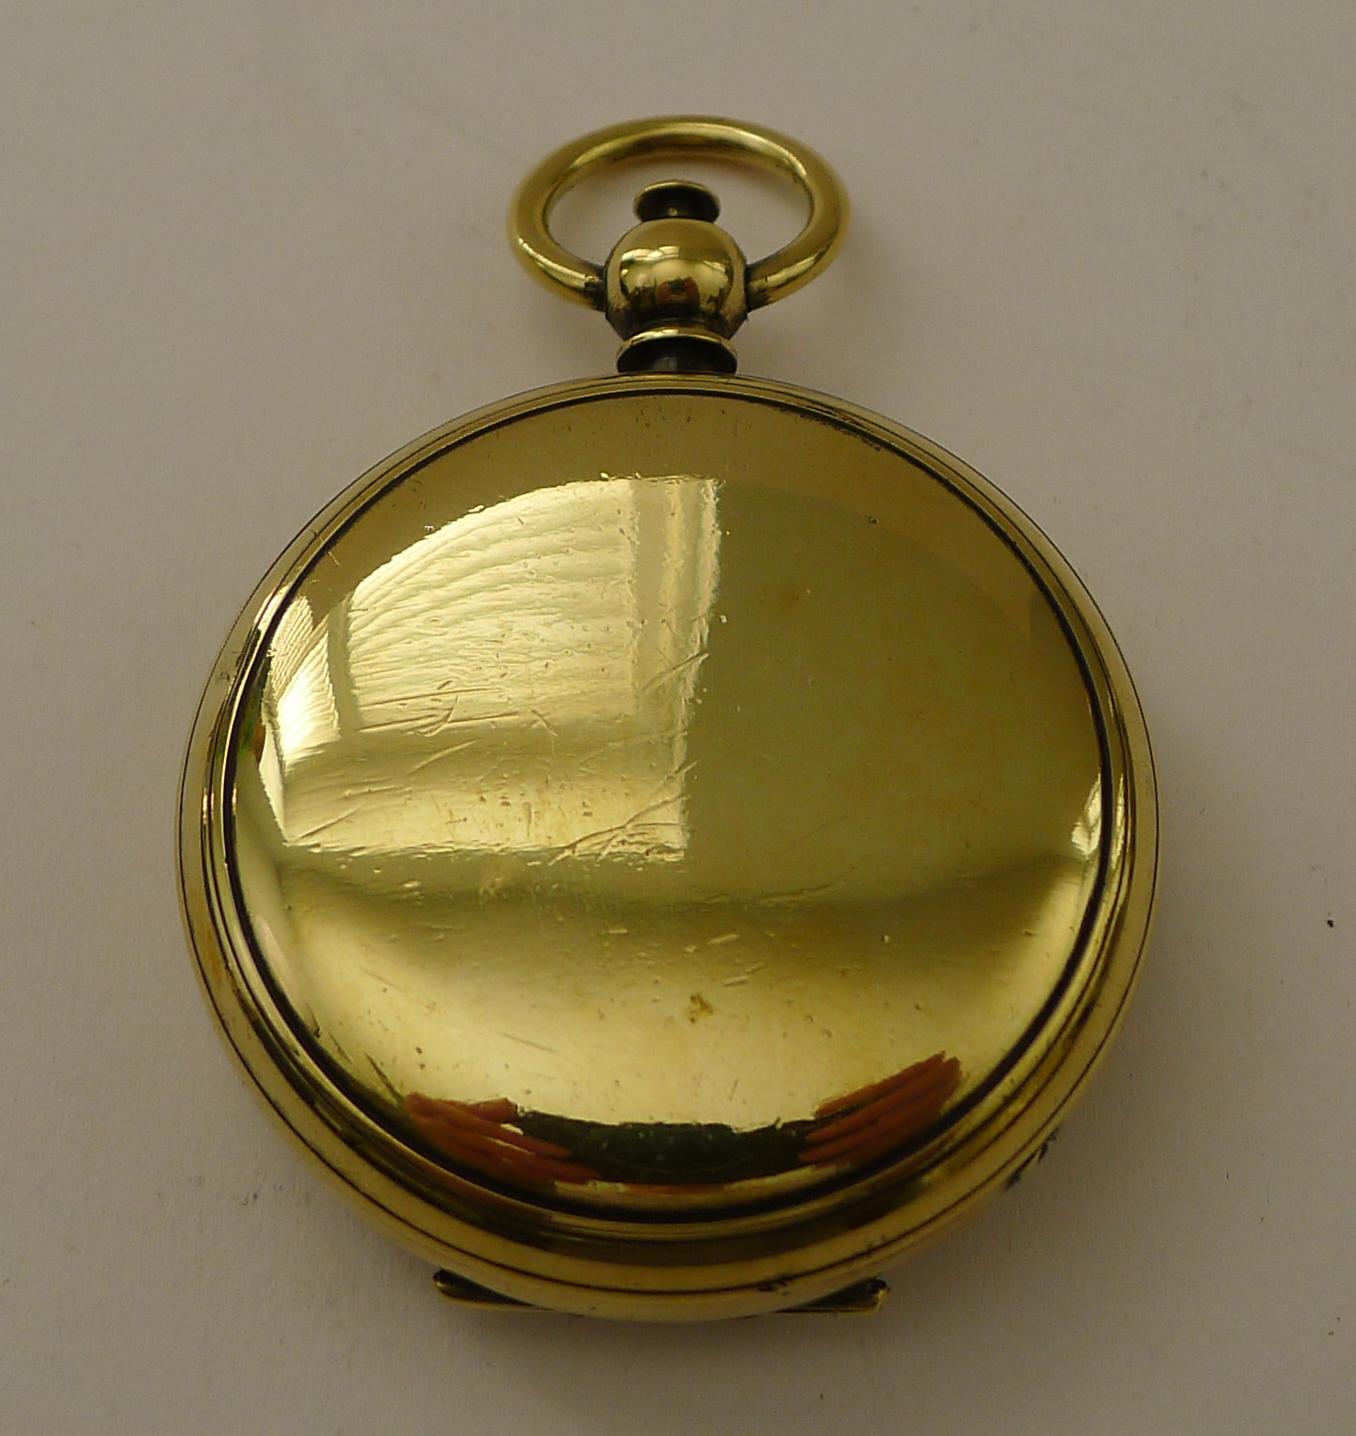 A handsome cased late Victorian or Edwardian compass with hinged lid, the little button on the top used to open; just like a pocket watch.

The dial is lucky enough to have an English Design Registration Number (416645) which allows us to date the